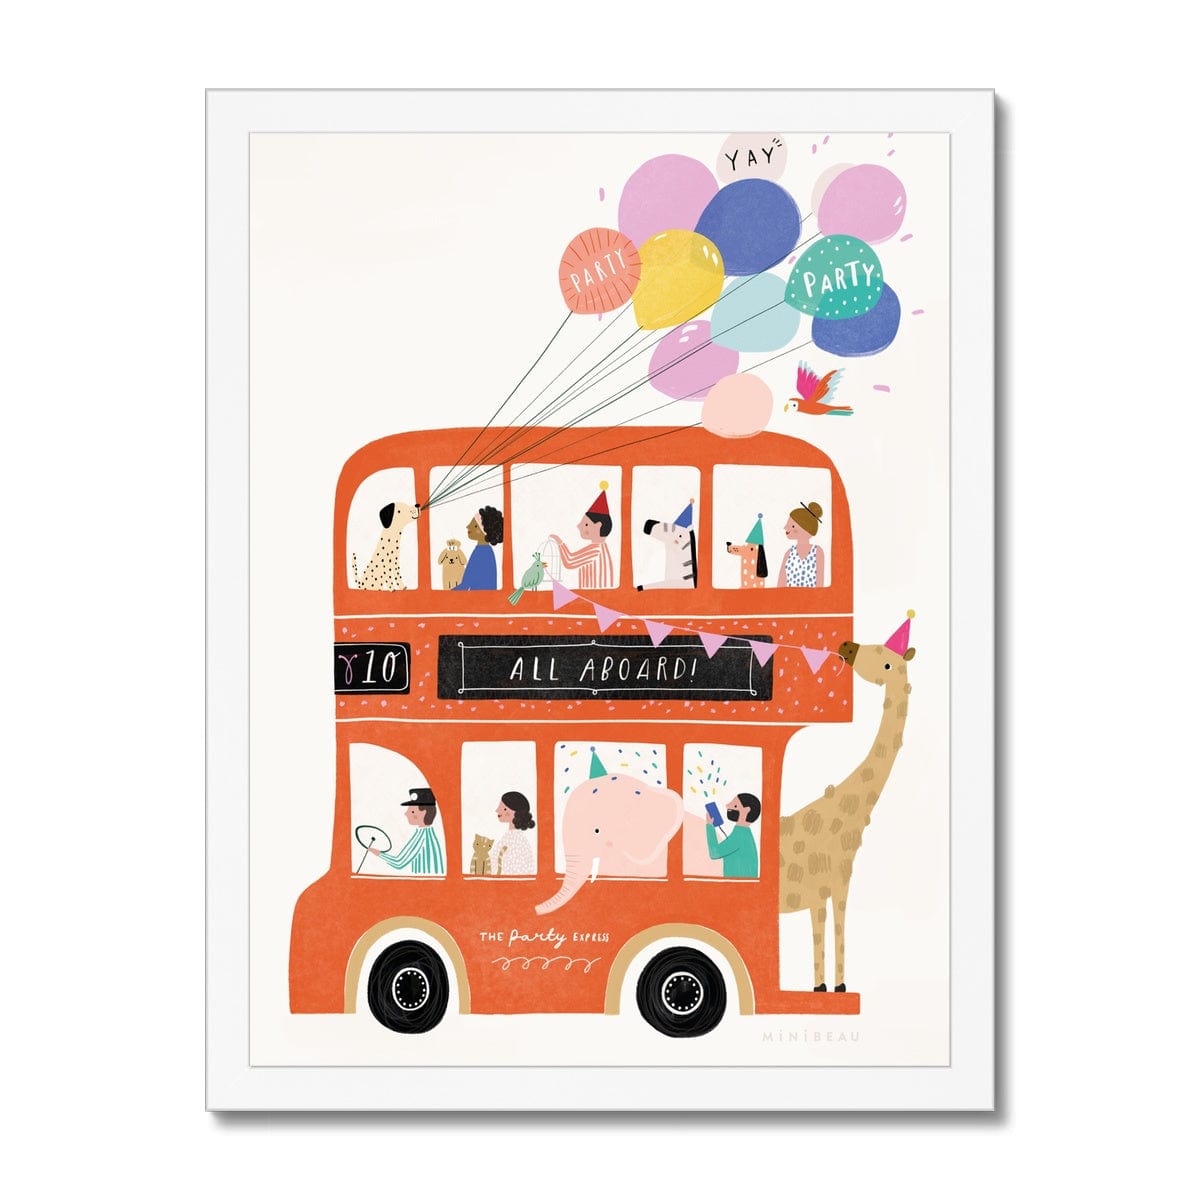 Art print in white frame. Our double decker bus art print features a Red double decker party bus called The Party Express with people and animals aboard. There is a dalmation holding a bunch of balloons out of a top window, a zebra wearing a blue party hat sitting upstairs, elephant hanging out of a downstairs window and a giraffe holding bunting on the back of the bus. There is a cat on the lower deck and a man firing confetti over the elephant.